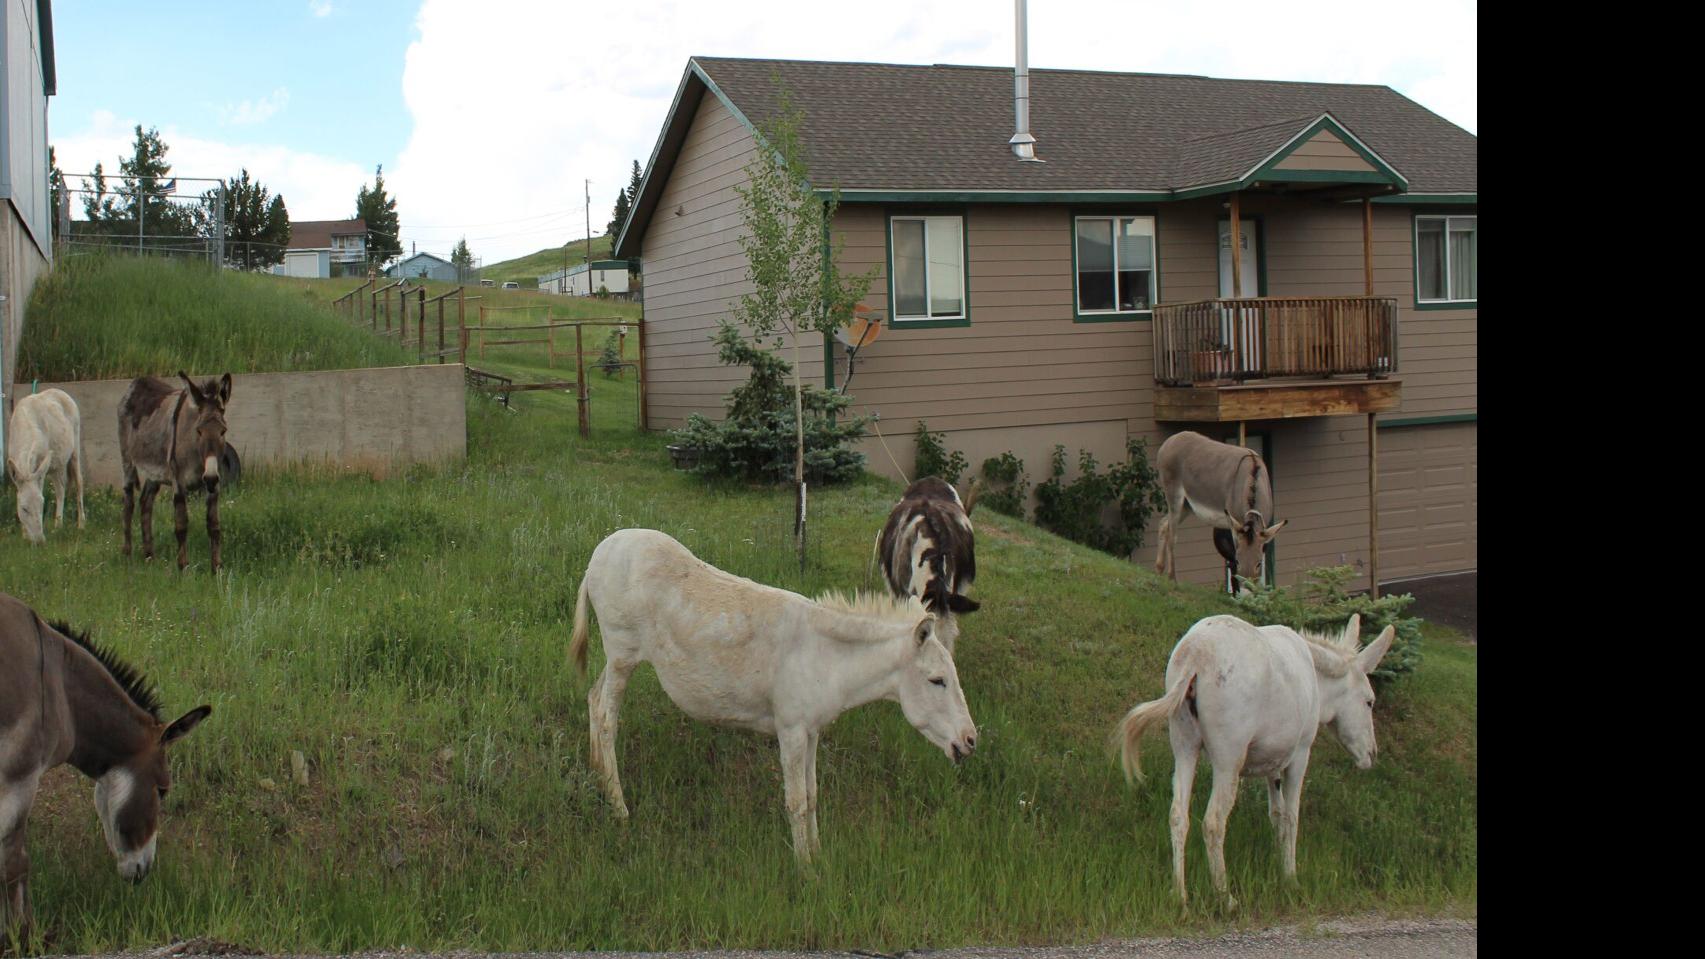 City of Cripple Creek Scales Back on Development Incentives For Housing